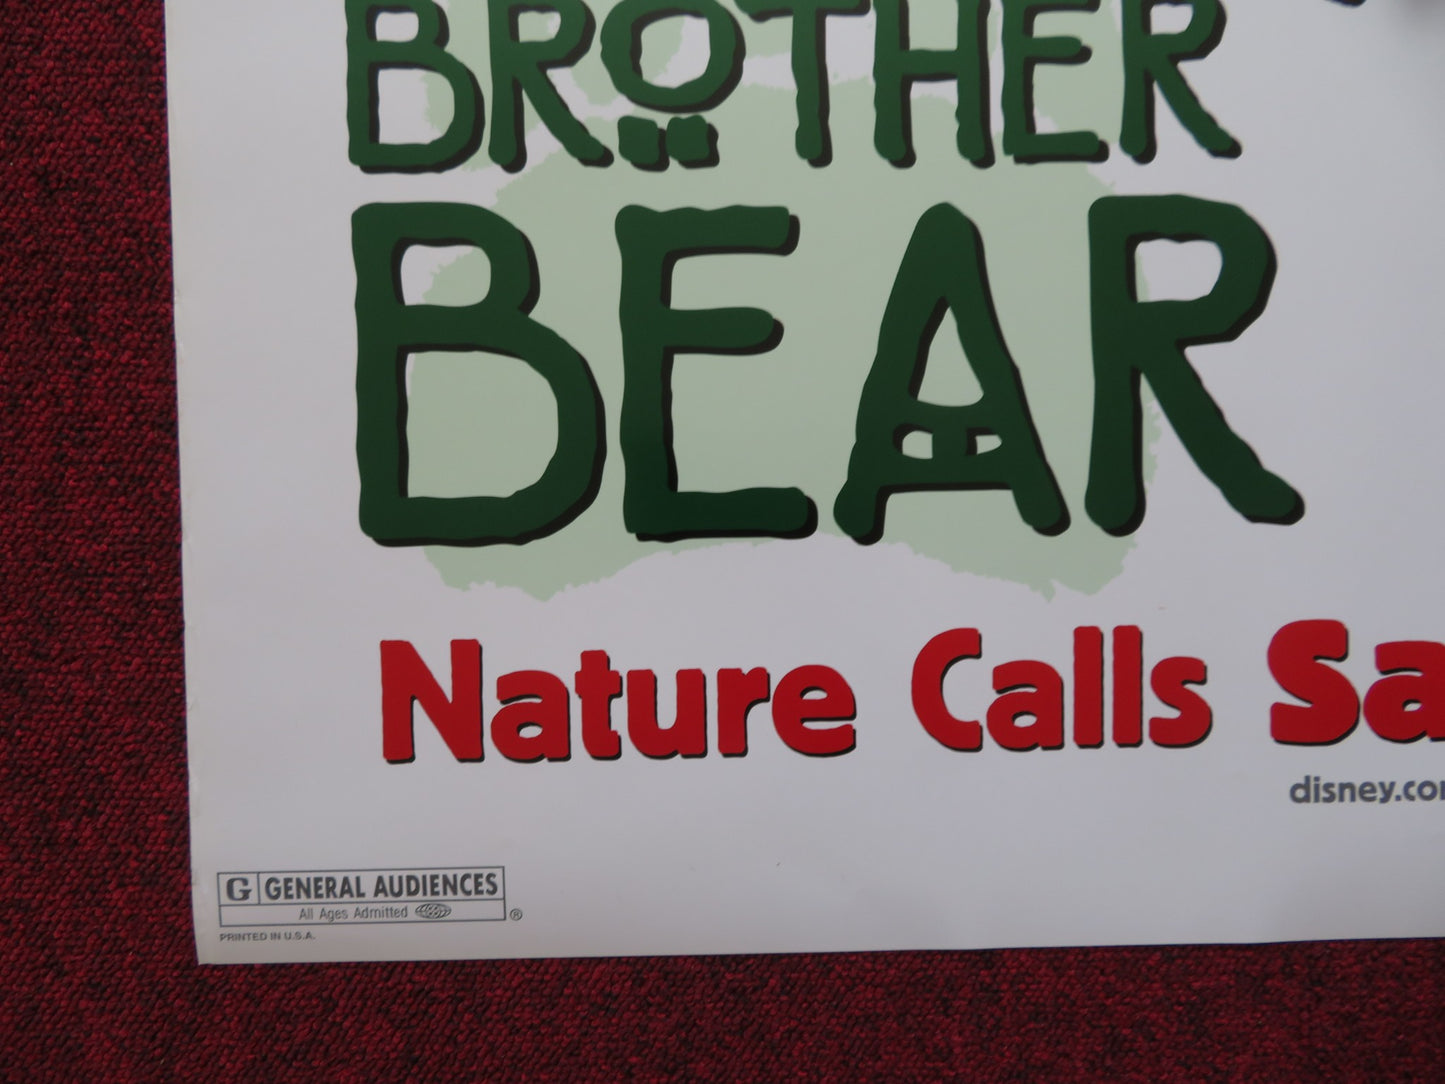 BROTHER BEAR - A US ONE SHEET ROLLED POSTER JOAQUIN PHOENIX JEREMY SUAREZ 2003